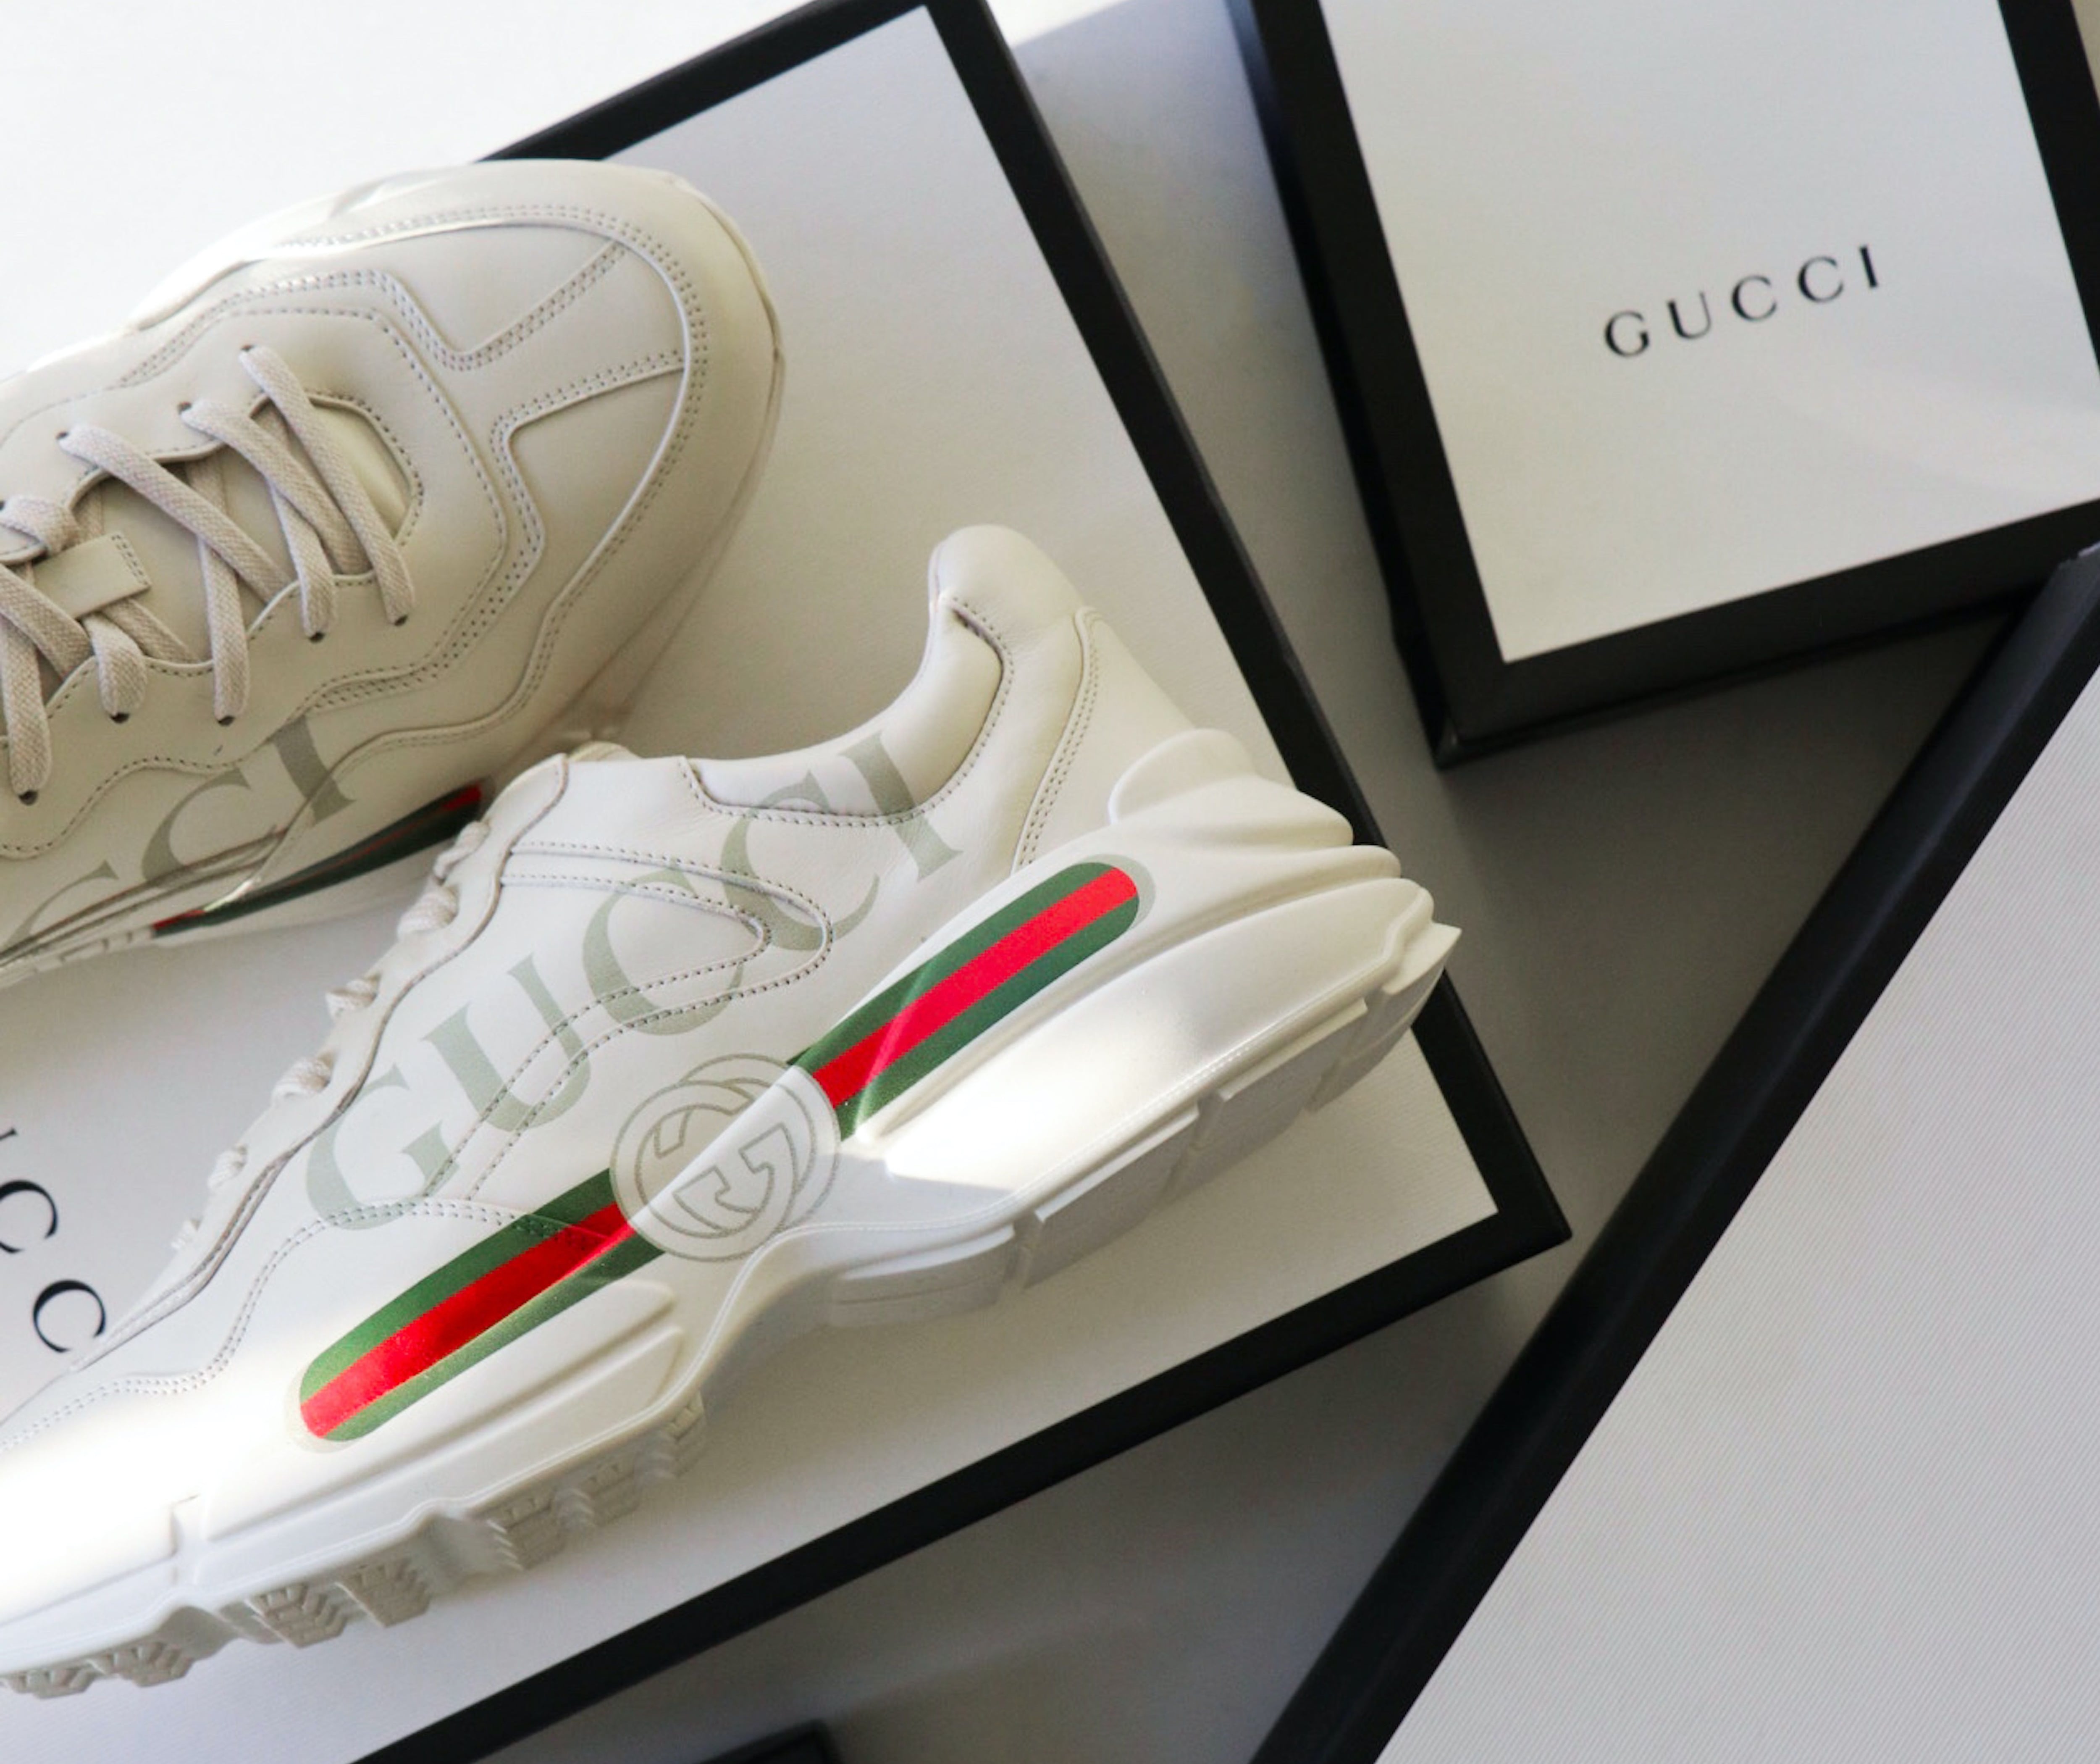 Gucci to Accept Crypto in Some US Retail Stores: Report